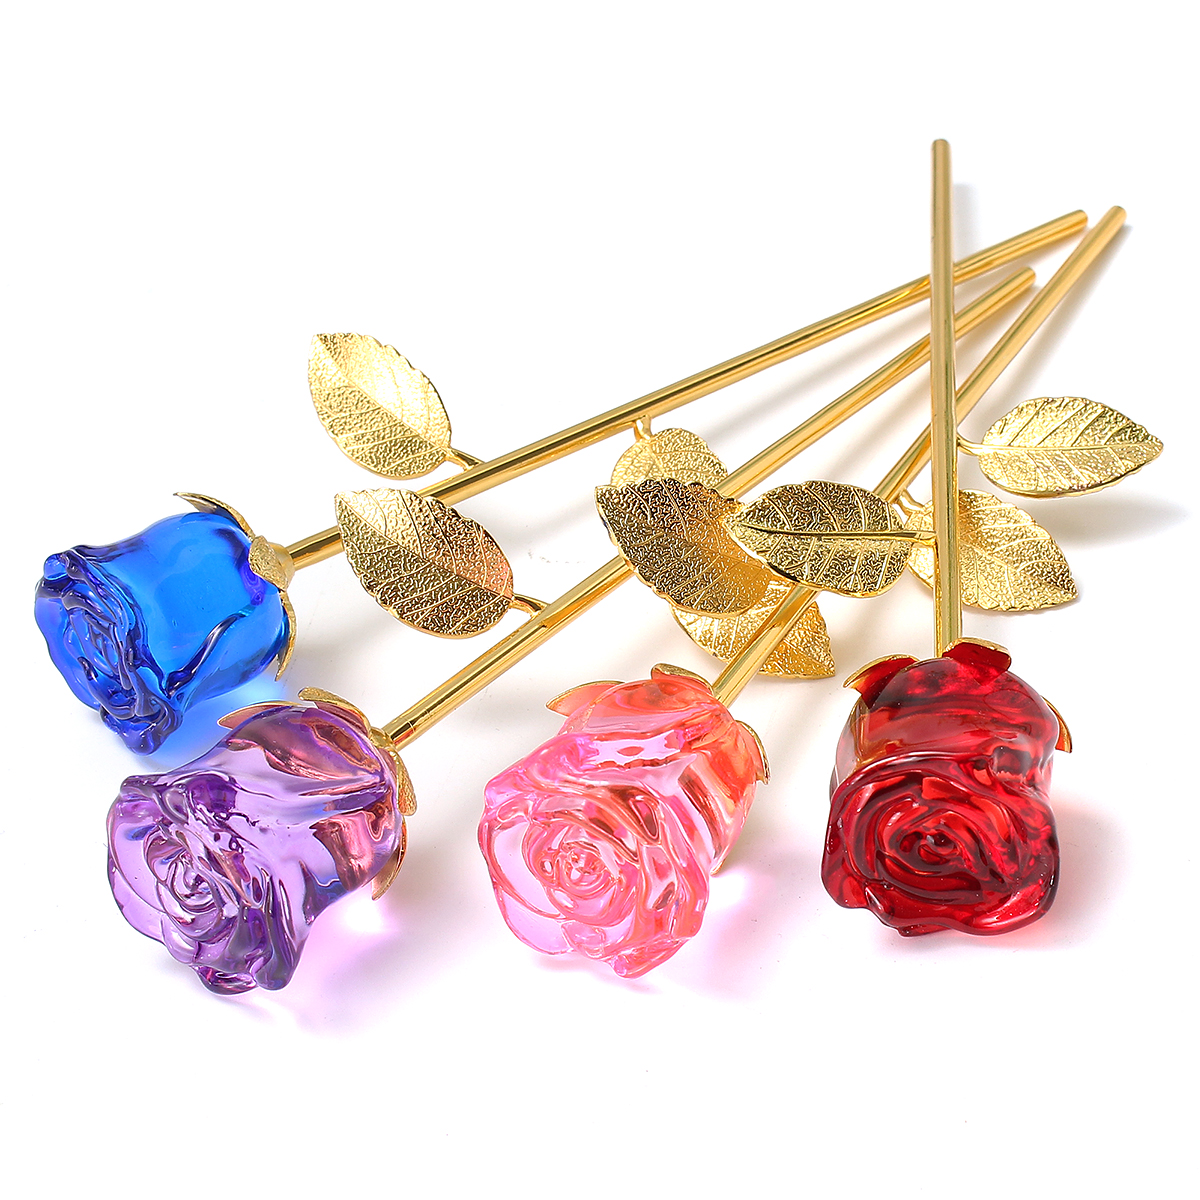 Crystal-Glass-Golden-Roses-Flower-Ornament-Valentine-Gifts-Present-with-Box-Home-Decorations-1430314-9